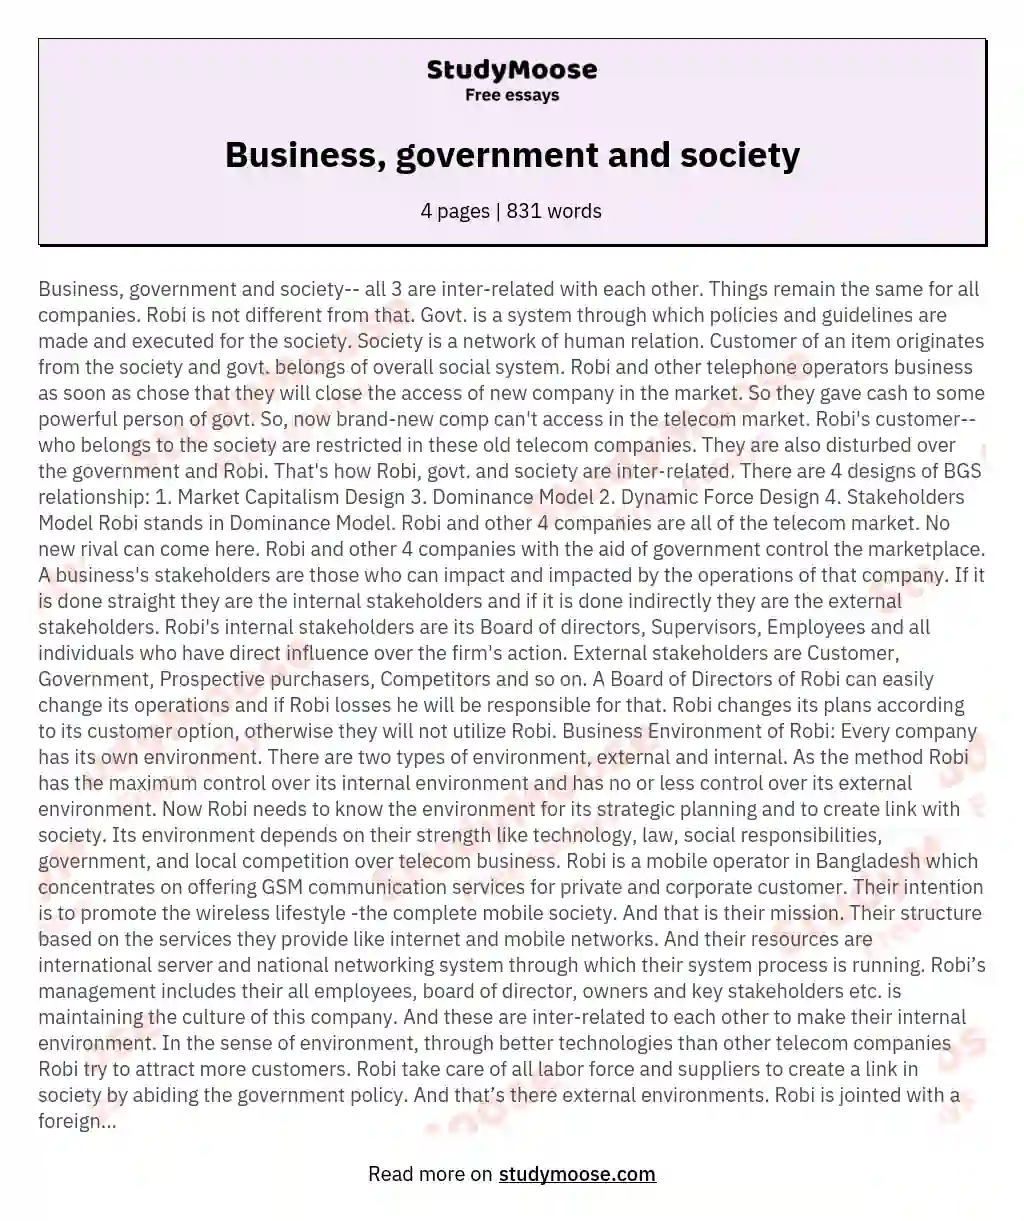 Business, government and society essay